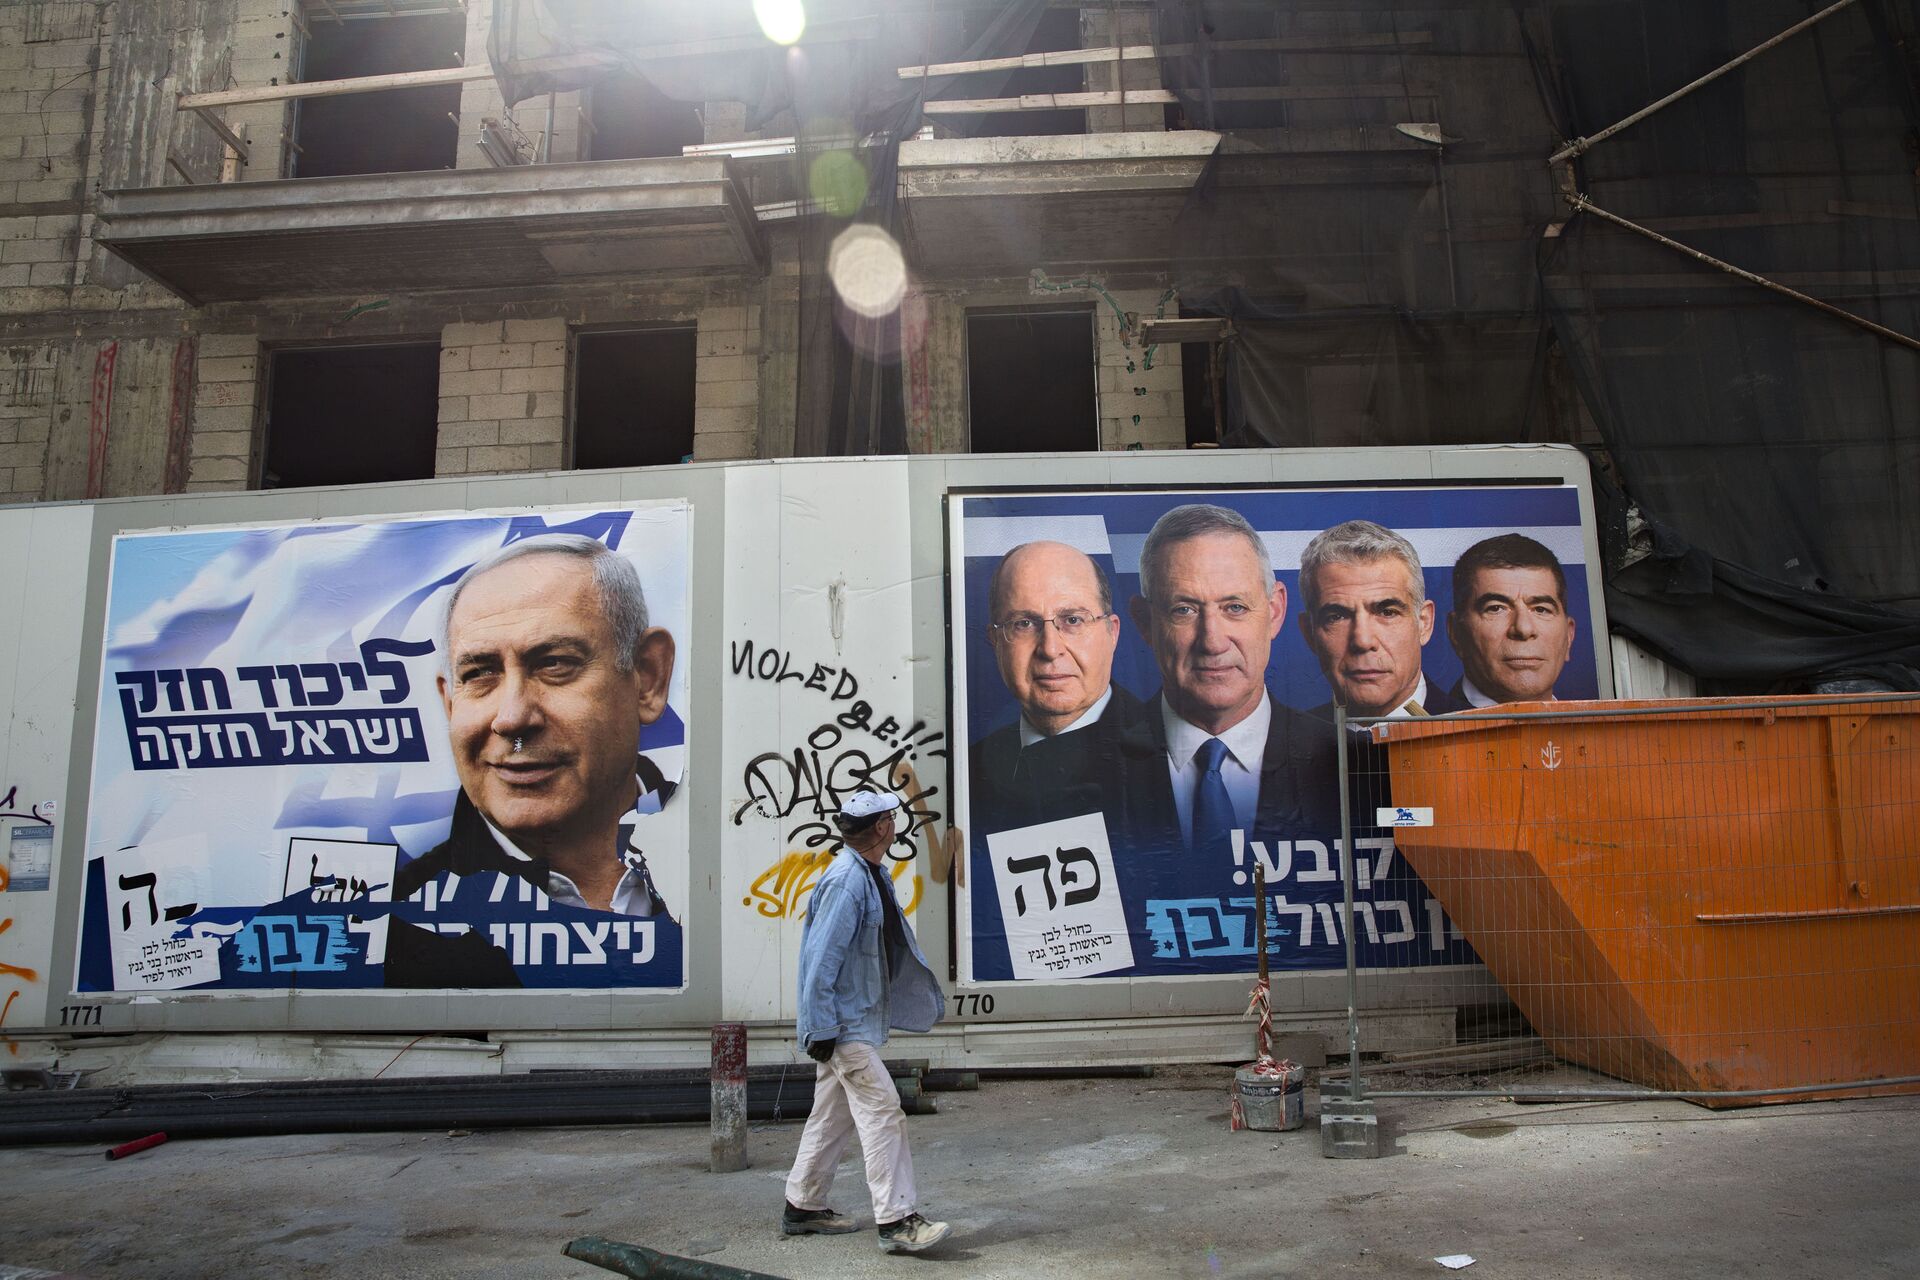 Parties May Come and Go, But Faces Remain Unchanged: Here are Israel's Key Players in Upcoming Polls - Sputnik International, 1920, 04.02.2021